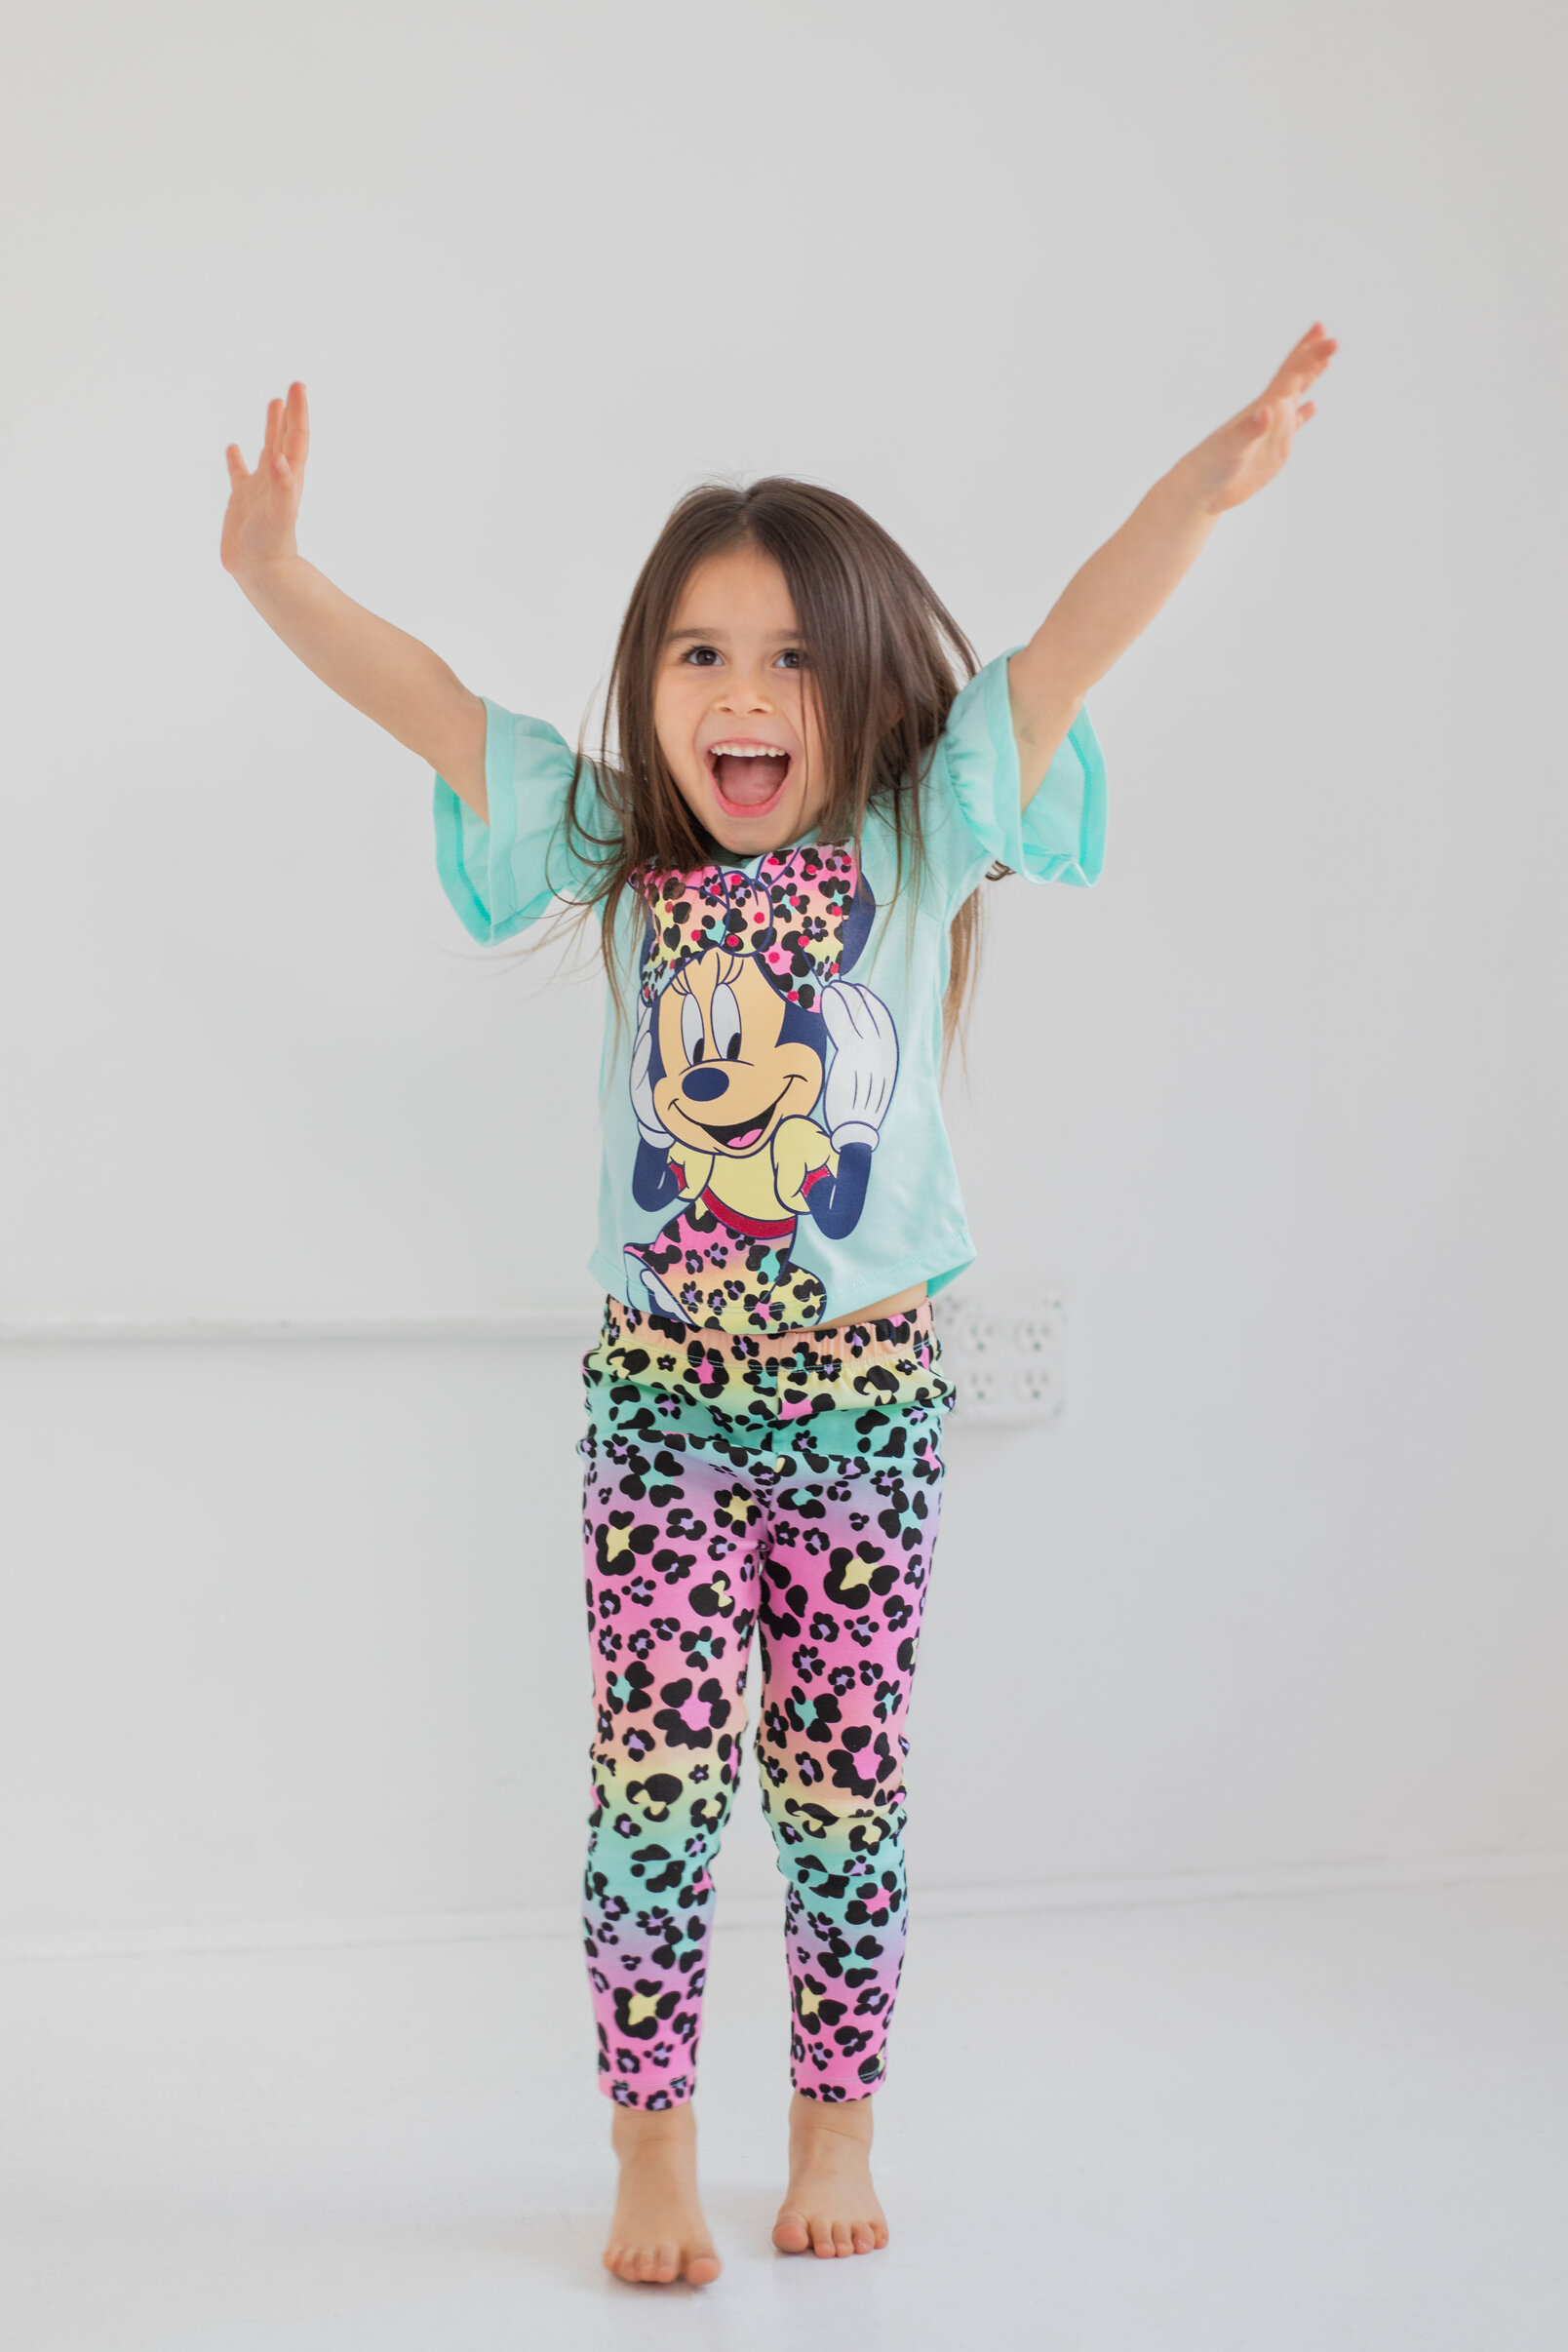 Disney Minnie Mouse Little Girls T-Shirt and Leggings Outfit Set Infant to Big Kid - image 2 of 5